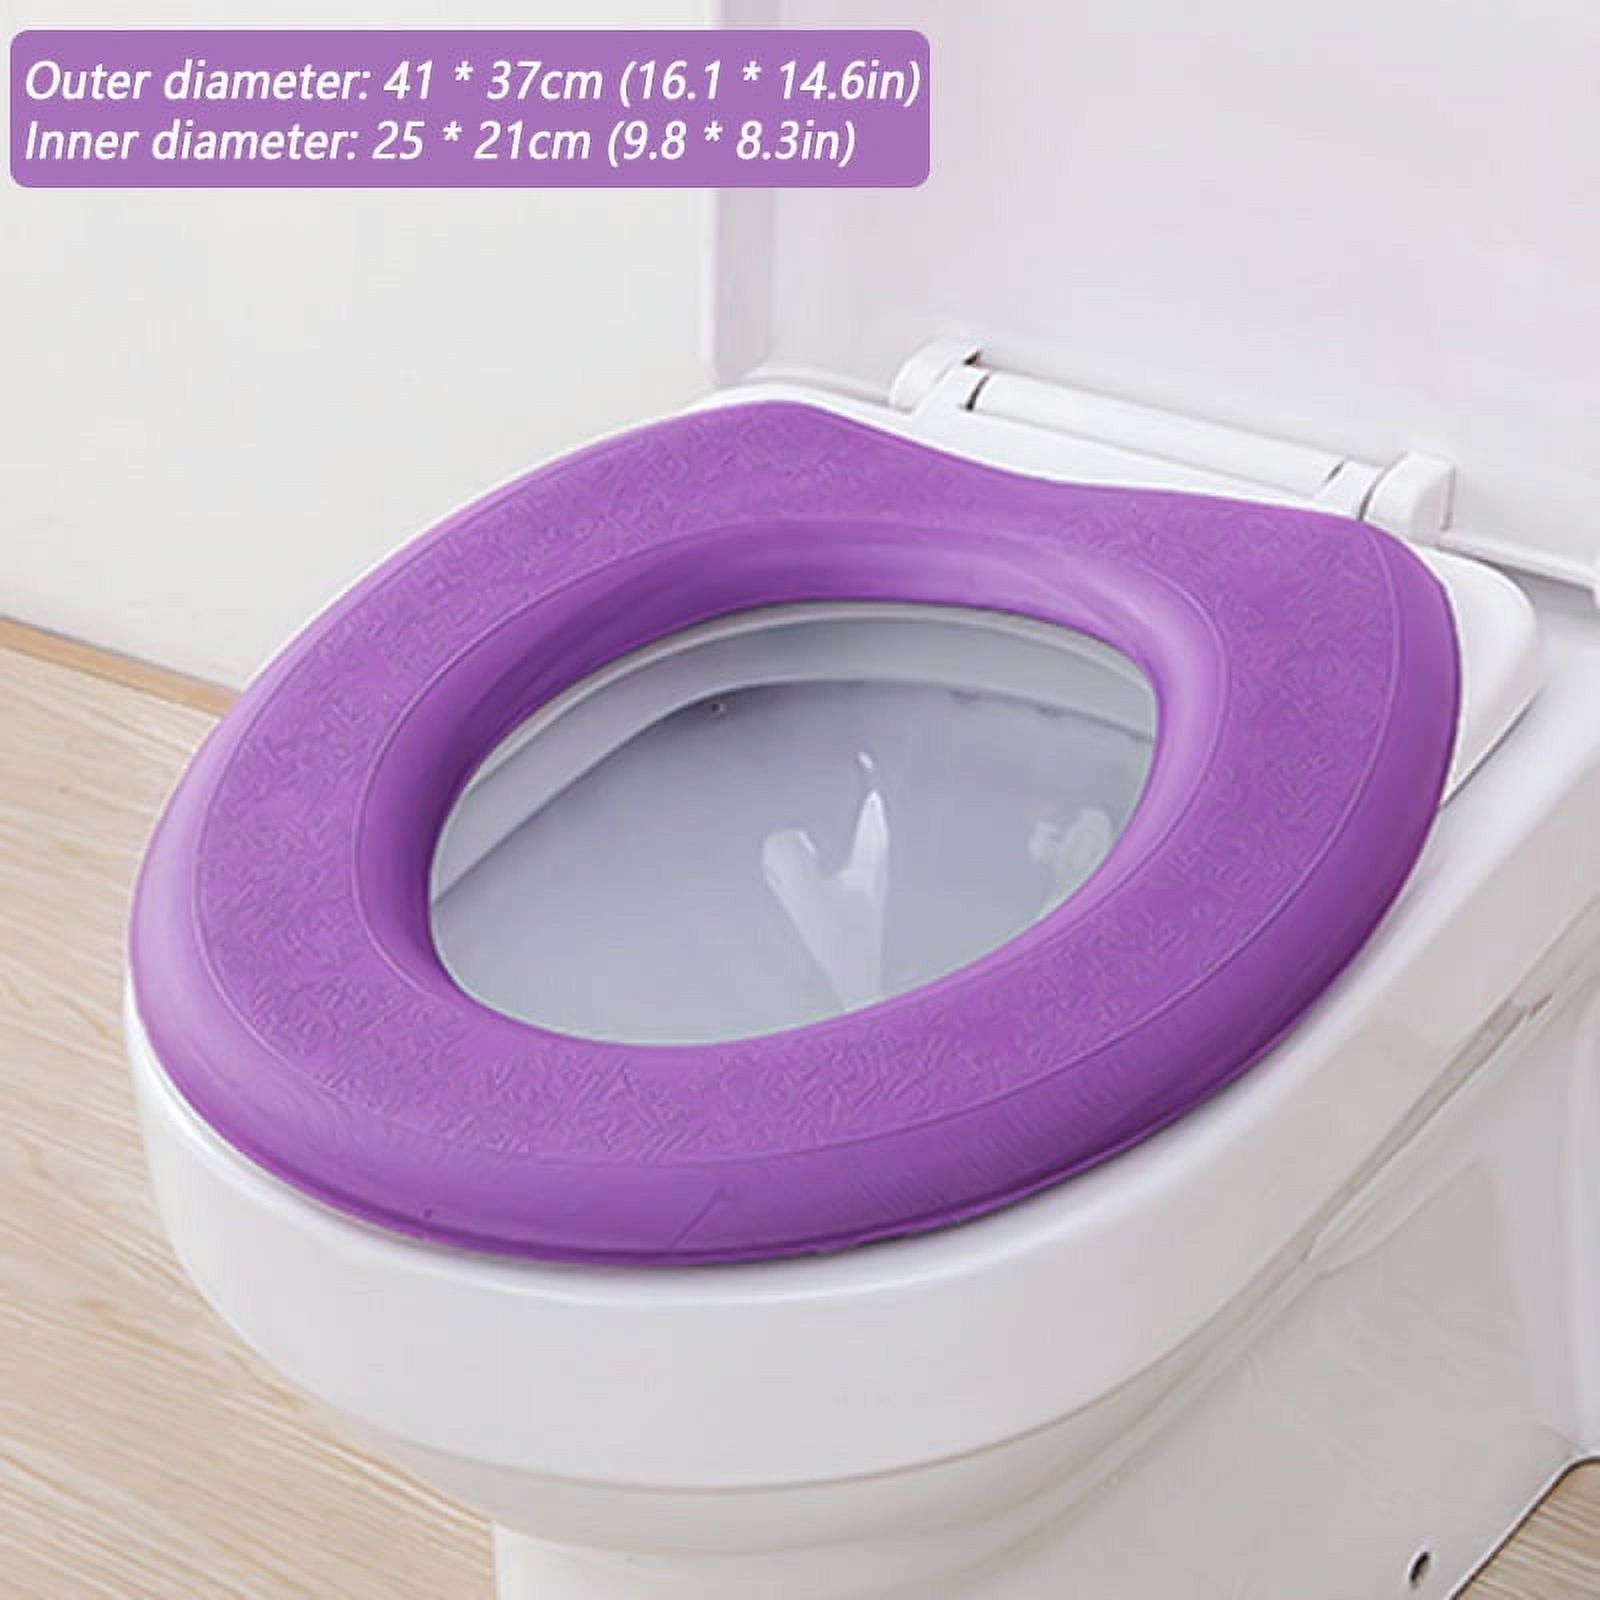 Toilet Seat Cushion Waterproof Soft Toilet Seat Cover Durable Warm